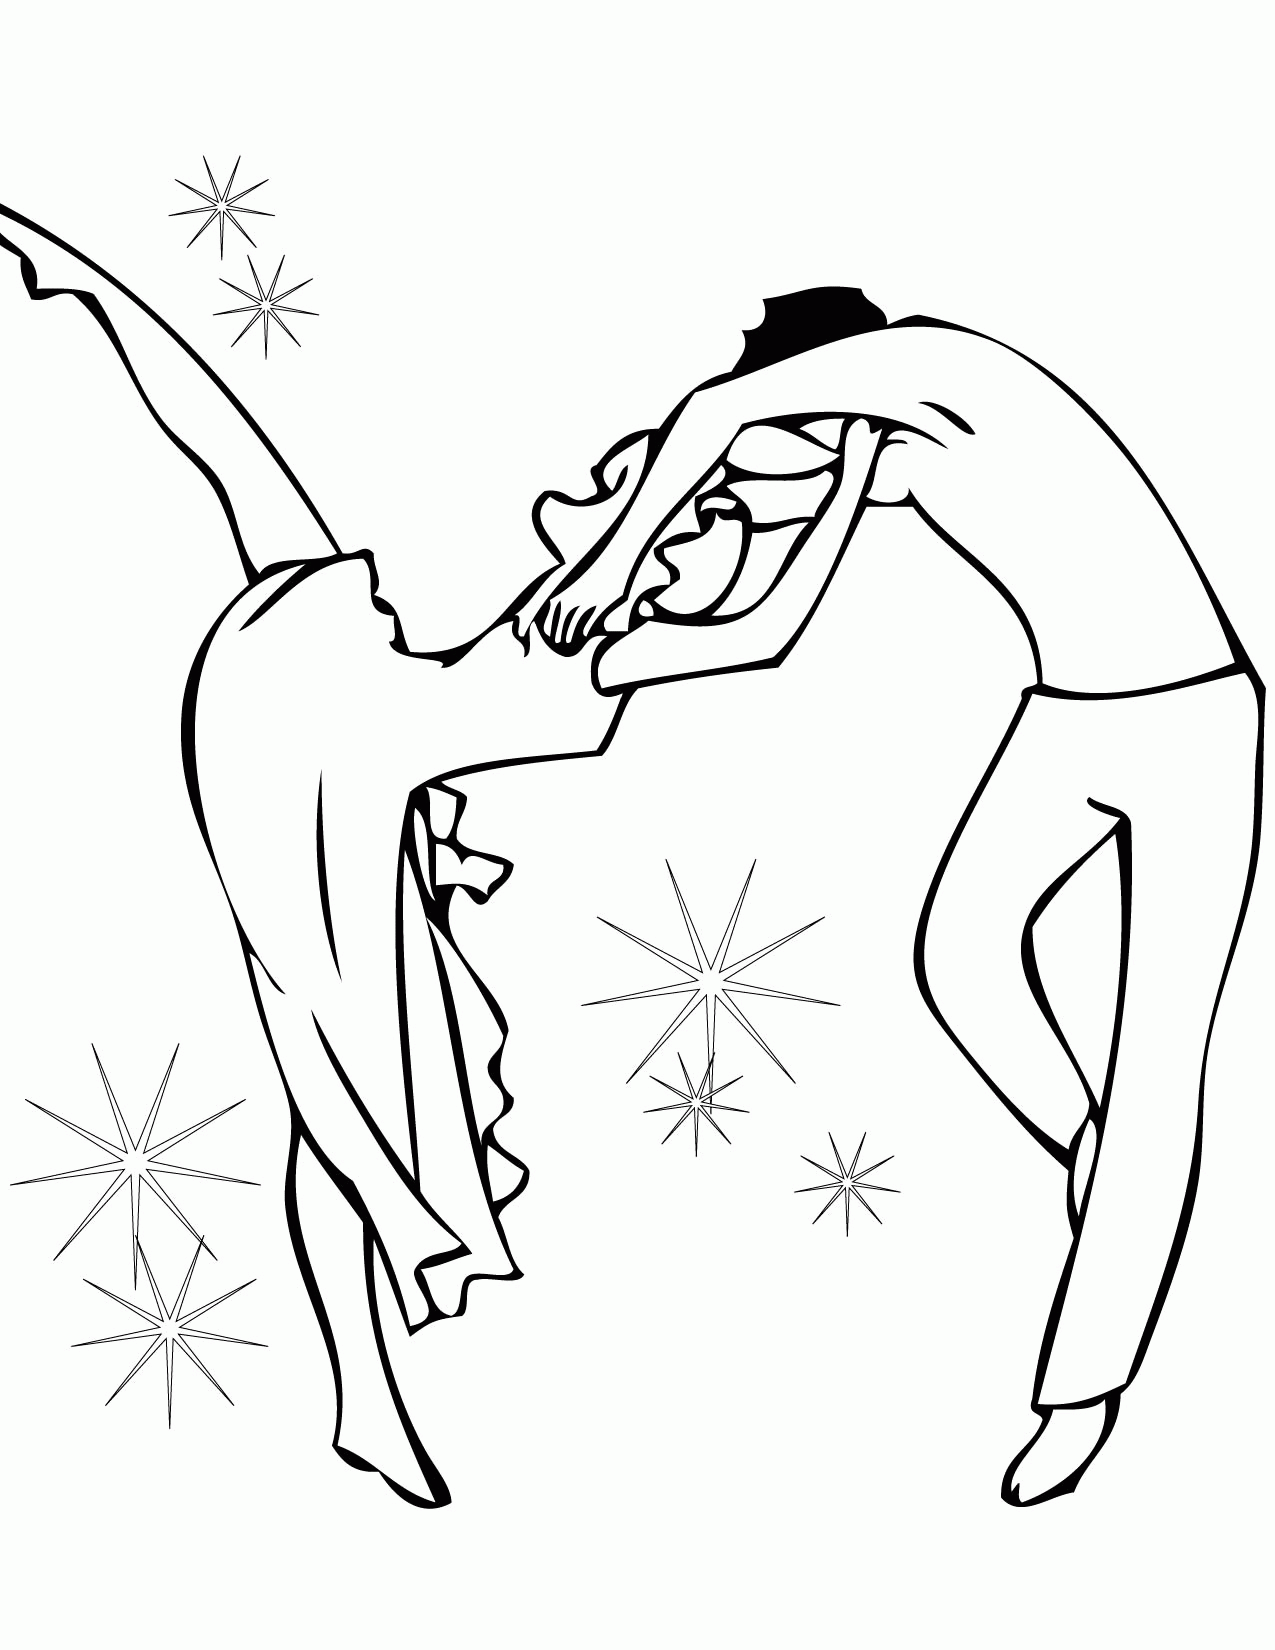 Jazz Coloring Page - Handipoints